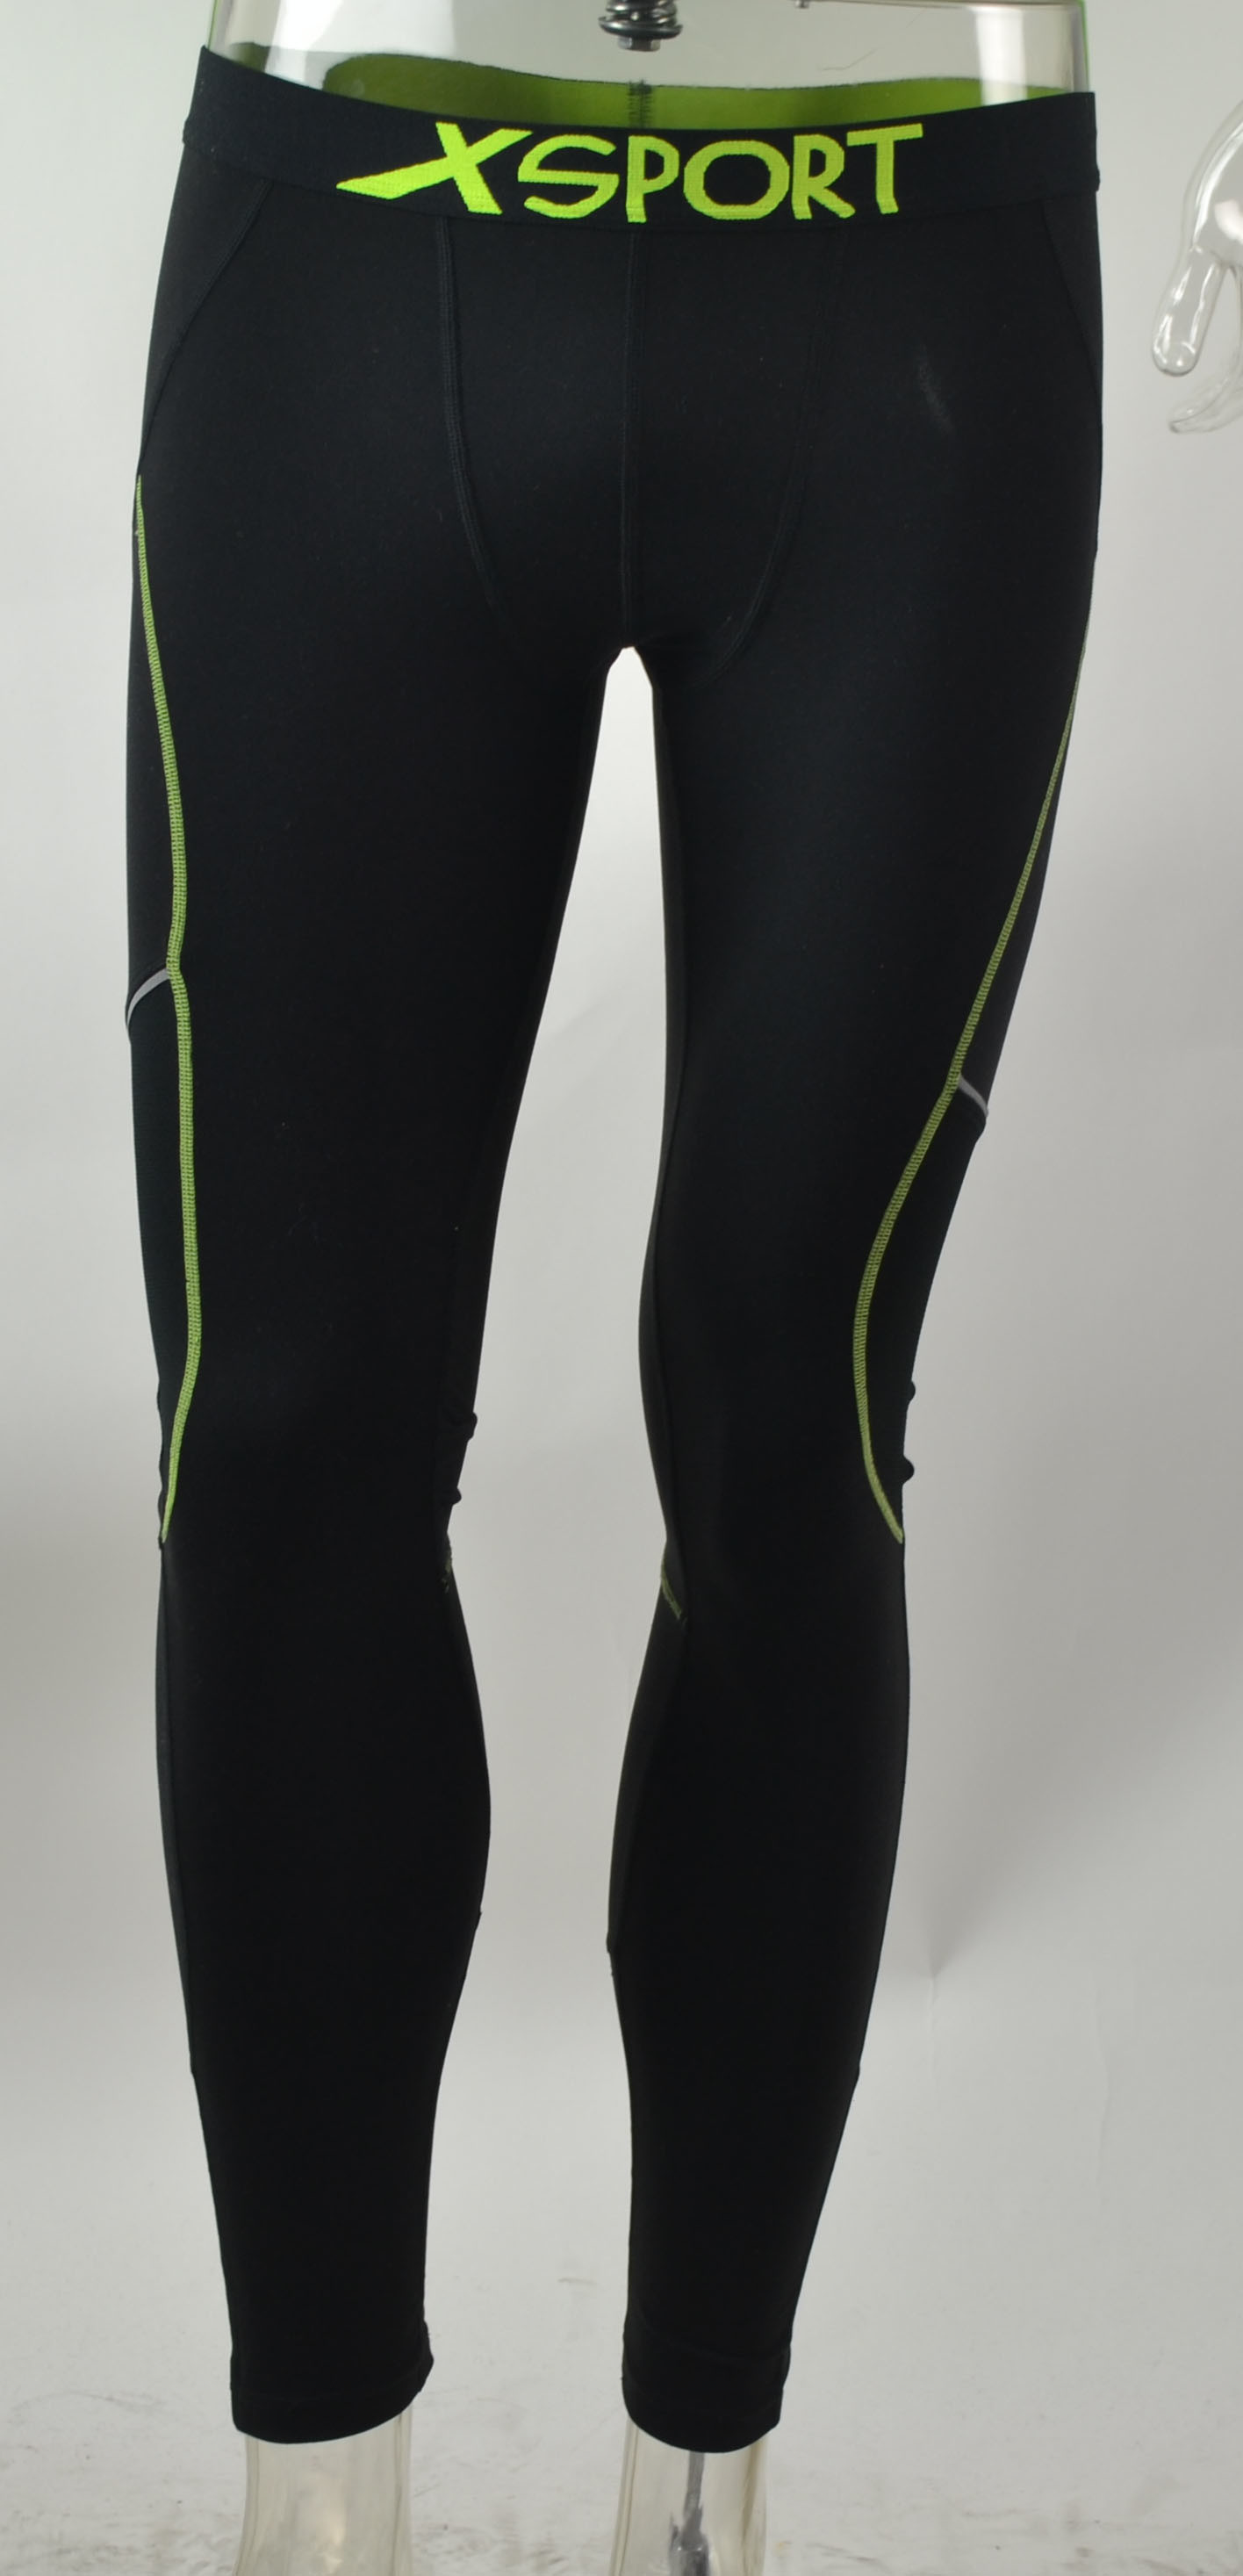 Compression Performance Tight Baselayer Pants/Cycling Sports Wear